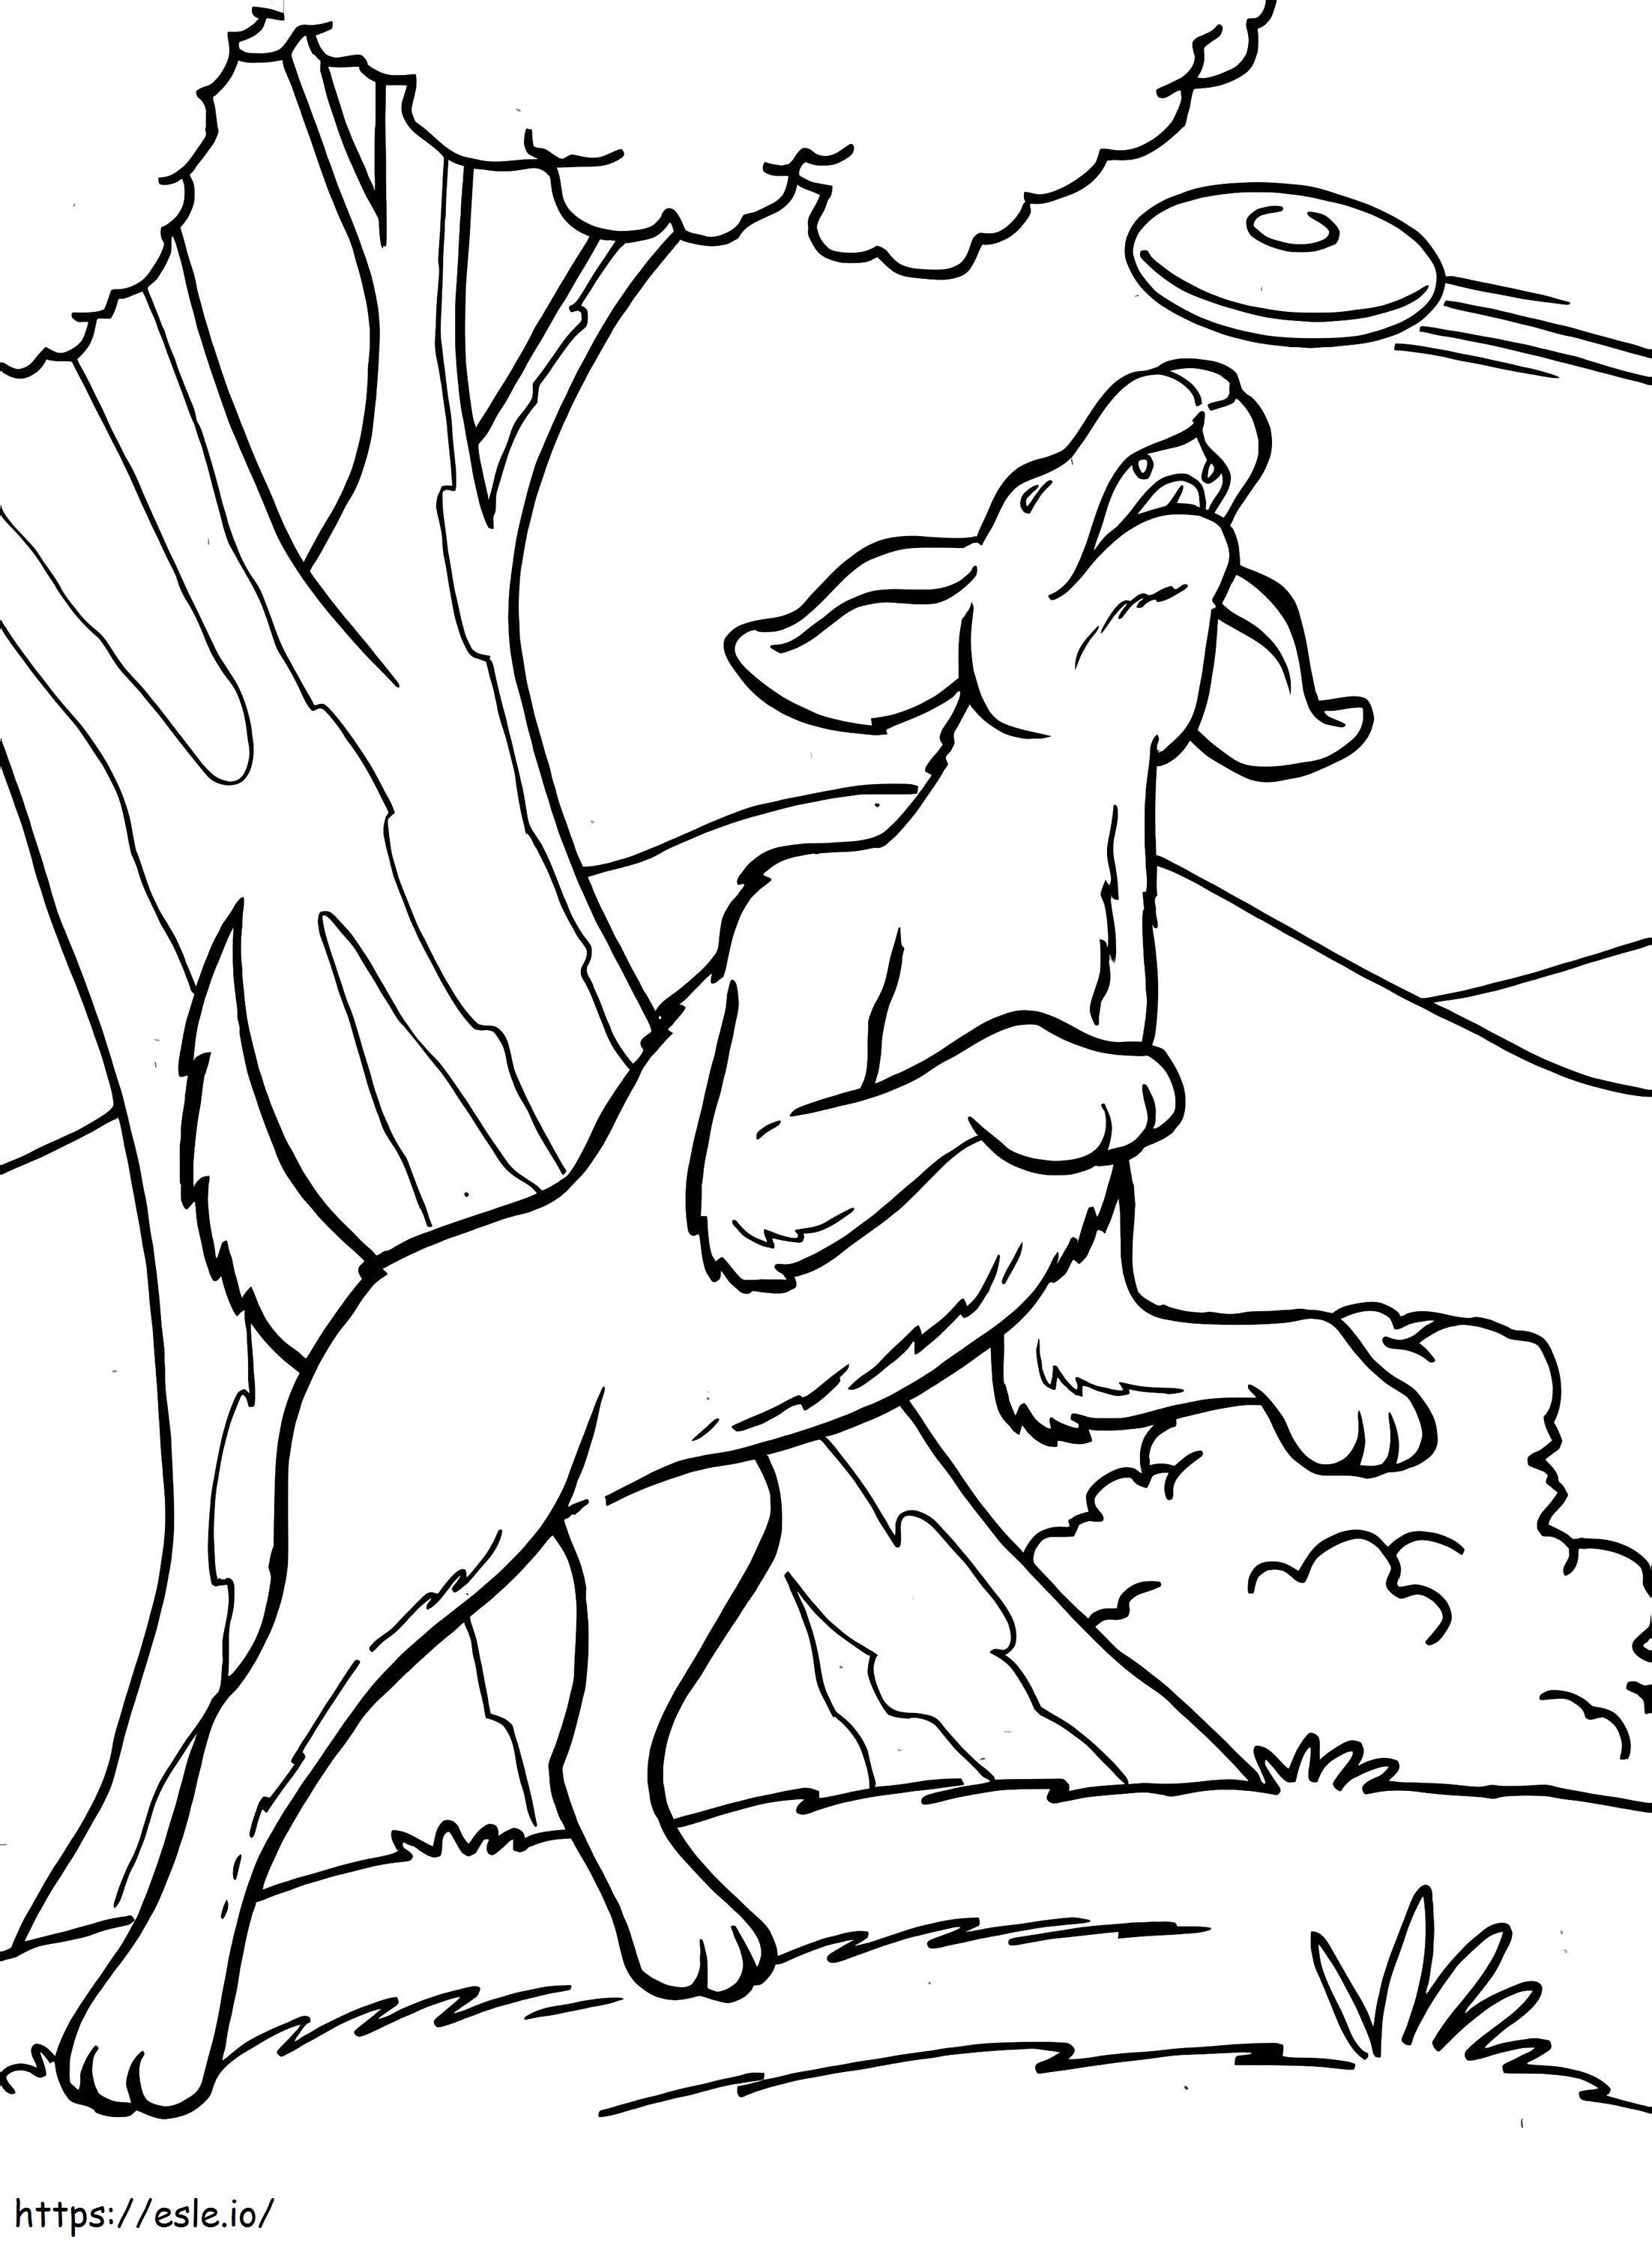 Dog Catching A Frisbee coloring page